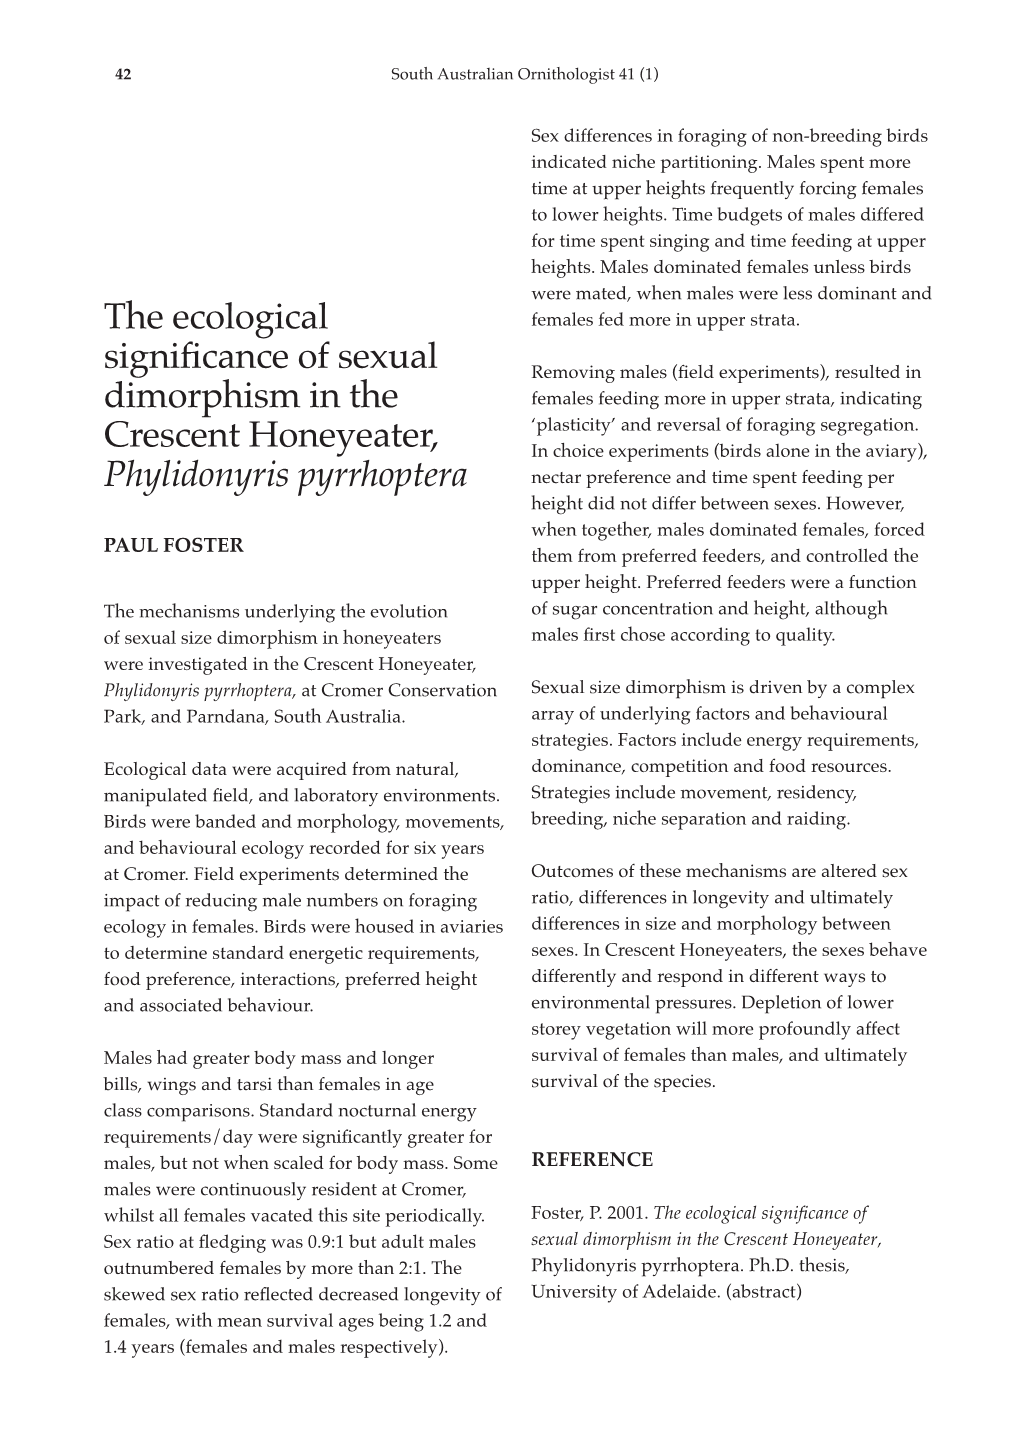 The Ecological Significance of Sexual Dimorphism in The